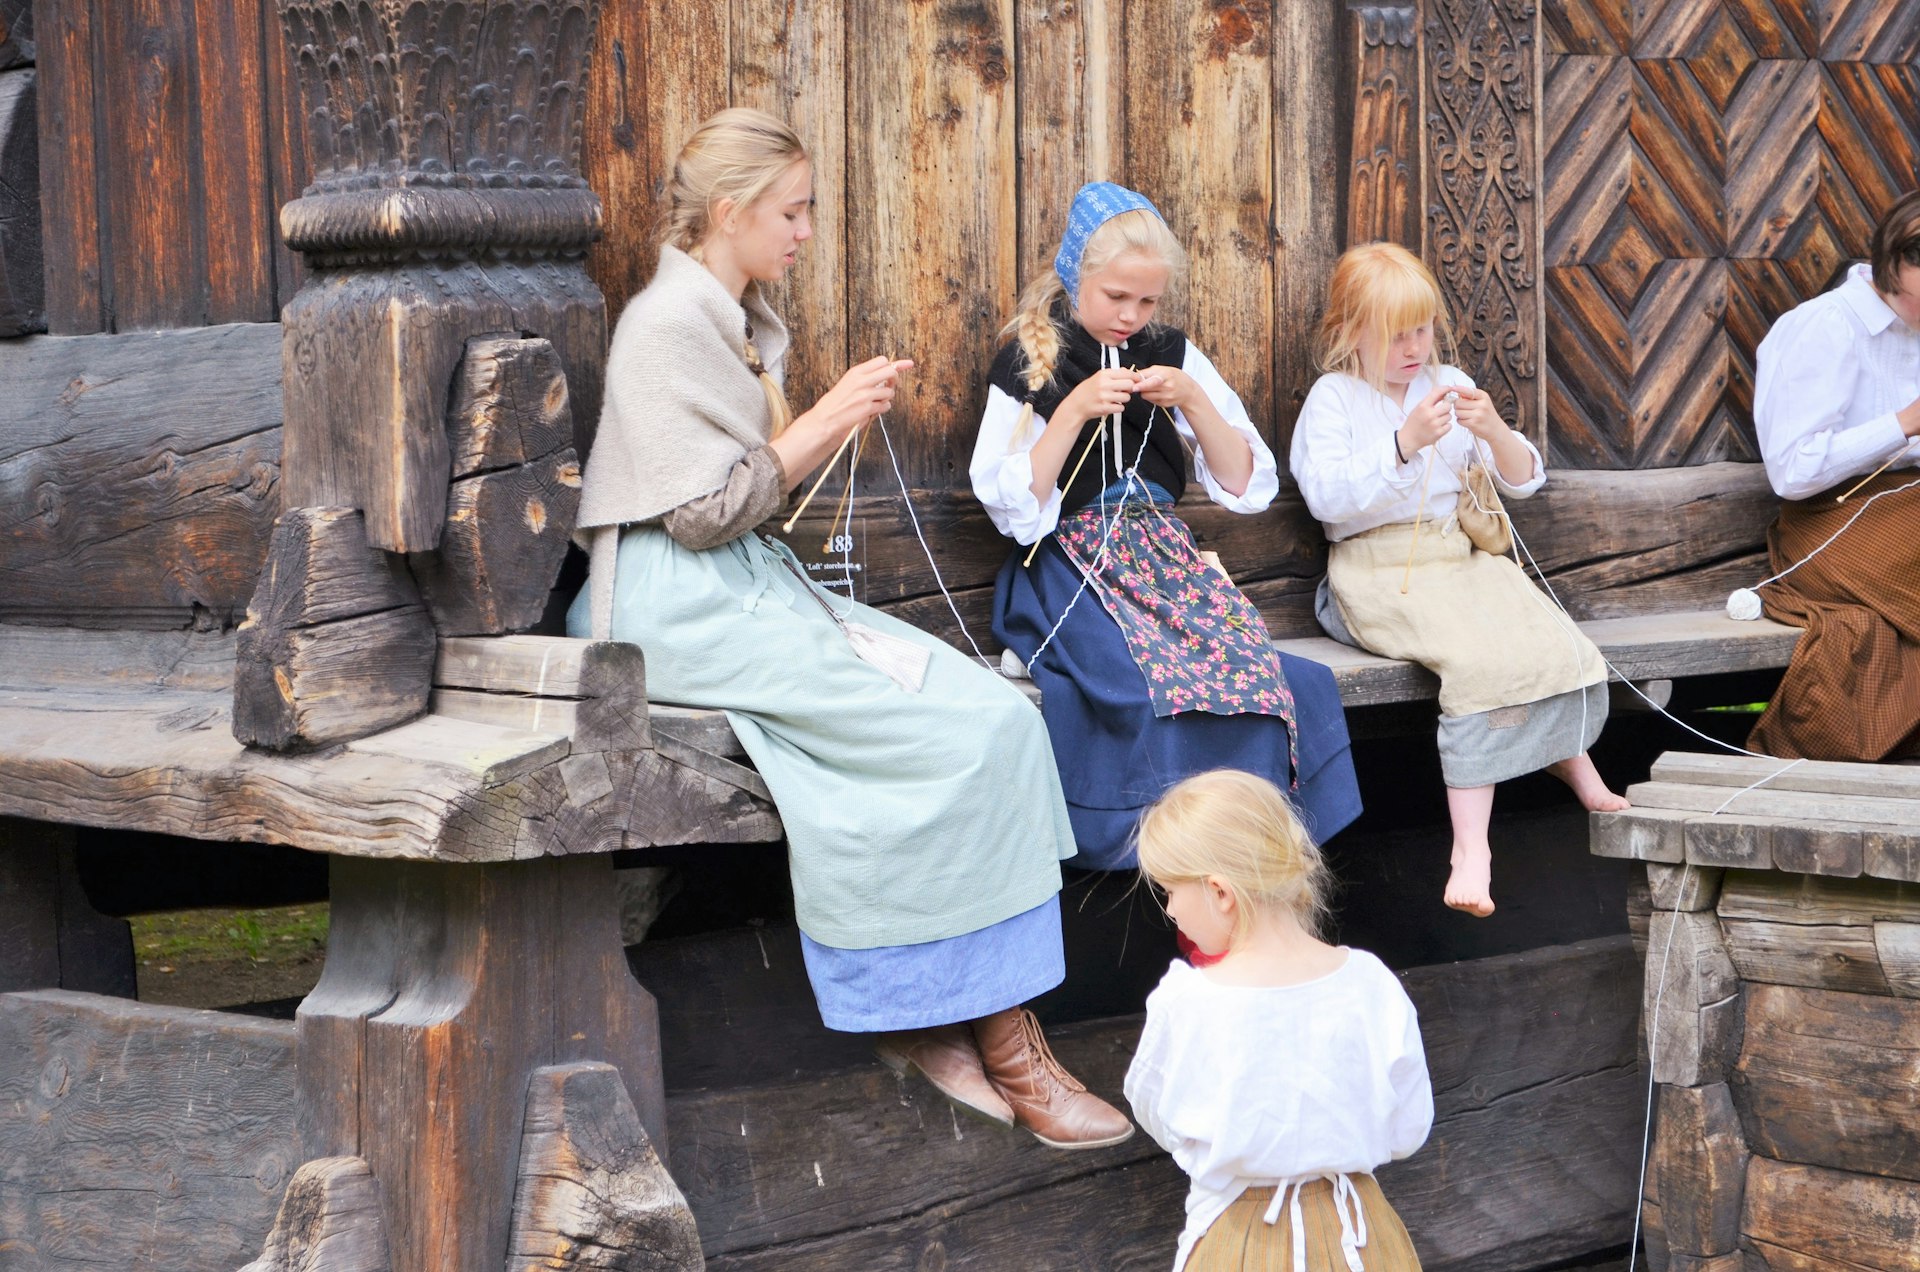 Girls in traditional dress knitting on a wooden porch at the Folkemuseum, Oslo, Norway